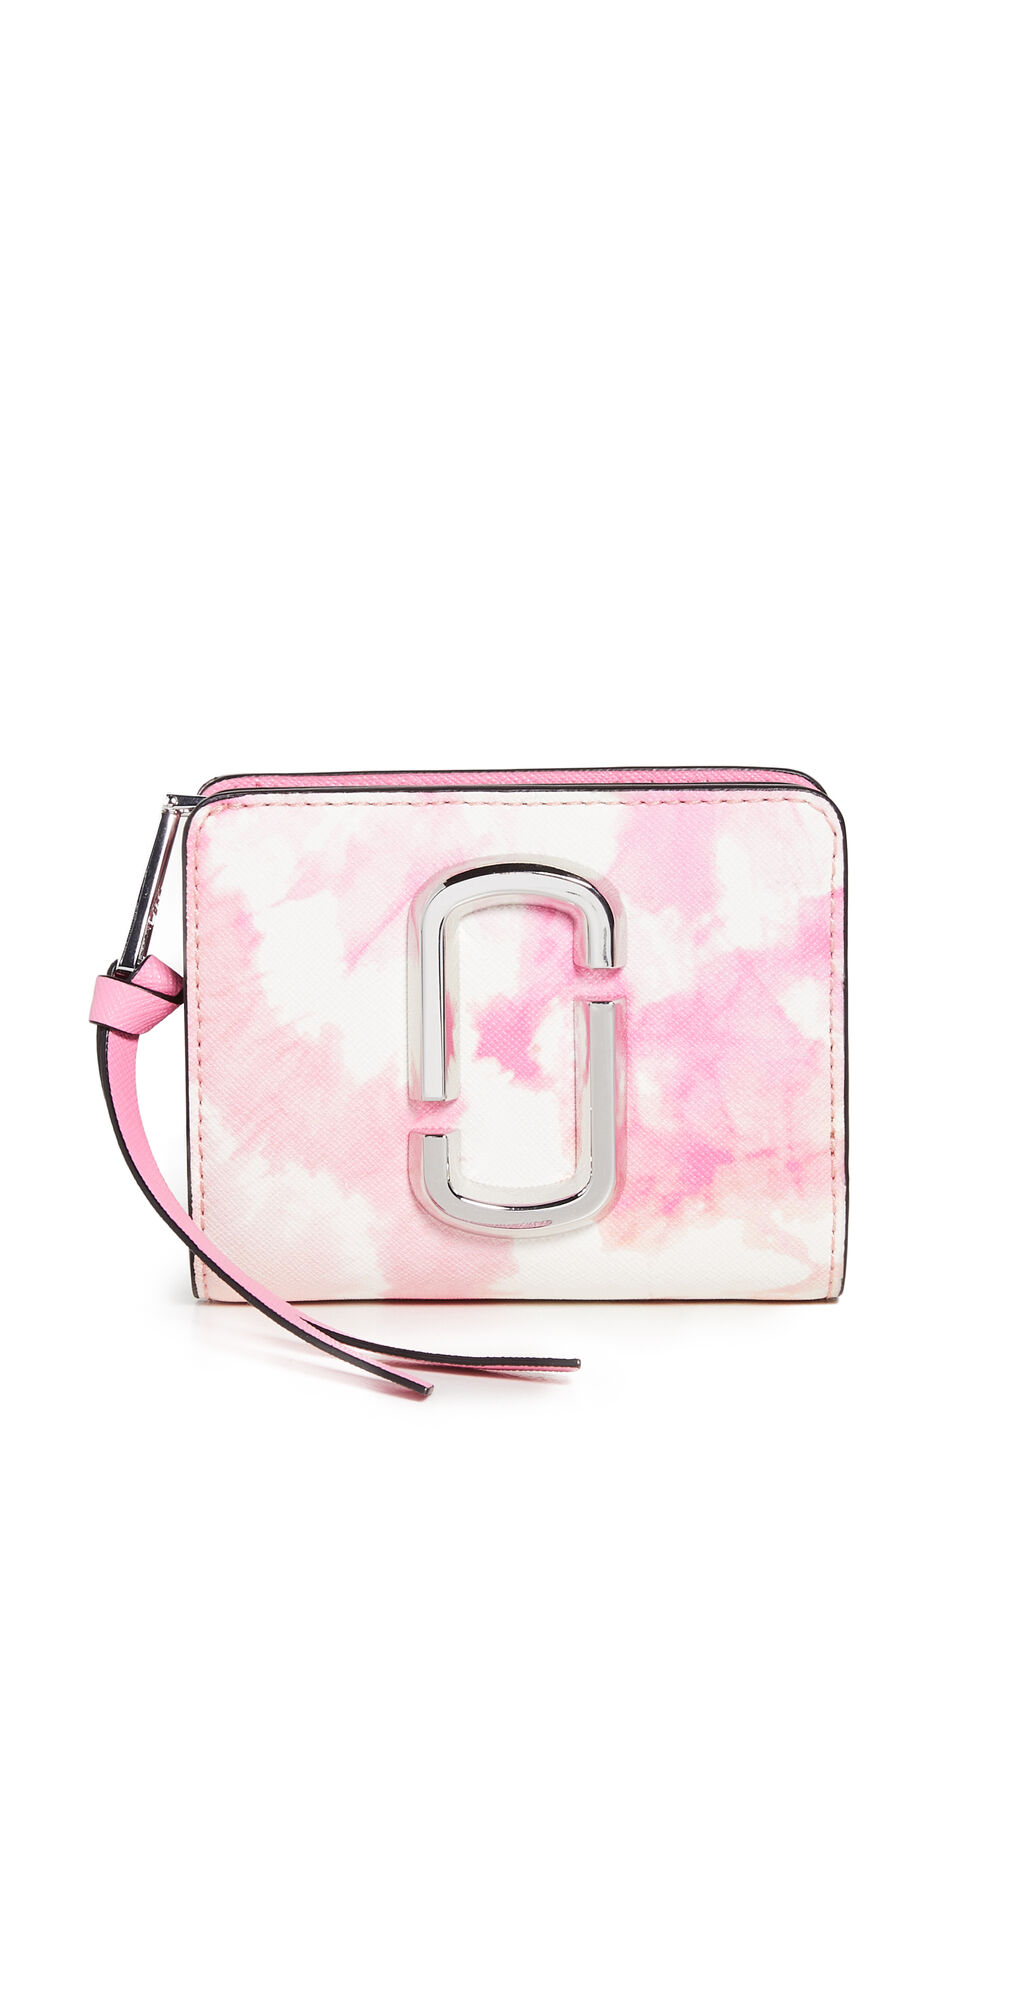 The Marc Jacobs Snapshot Mini Compact Wallet Pink Multi One Size  Pink Multi  size:One Size